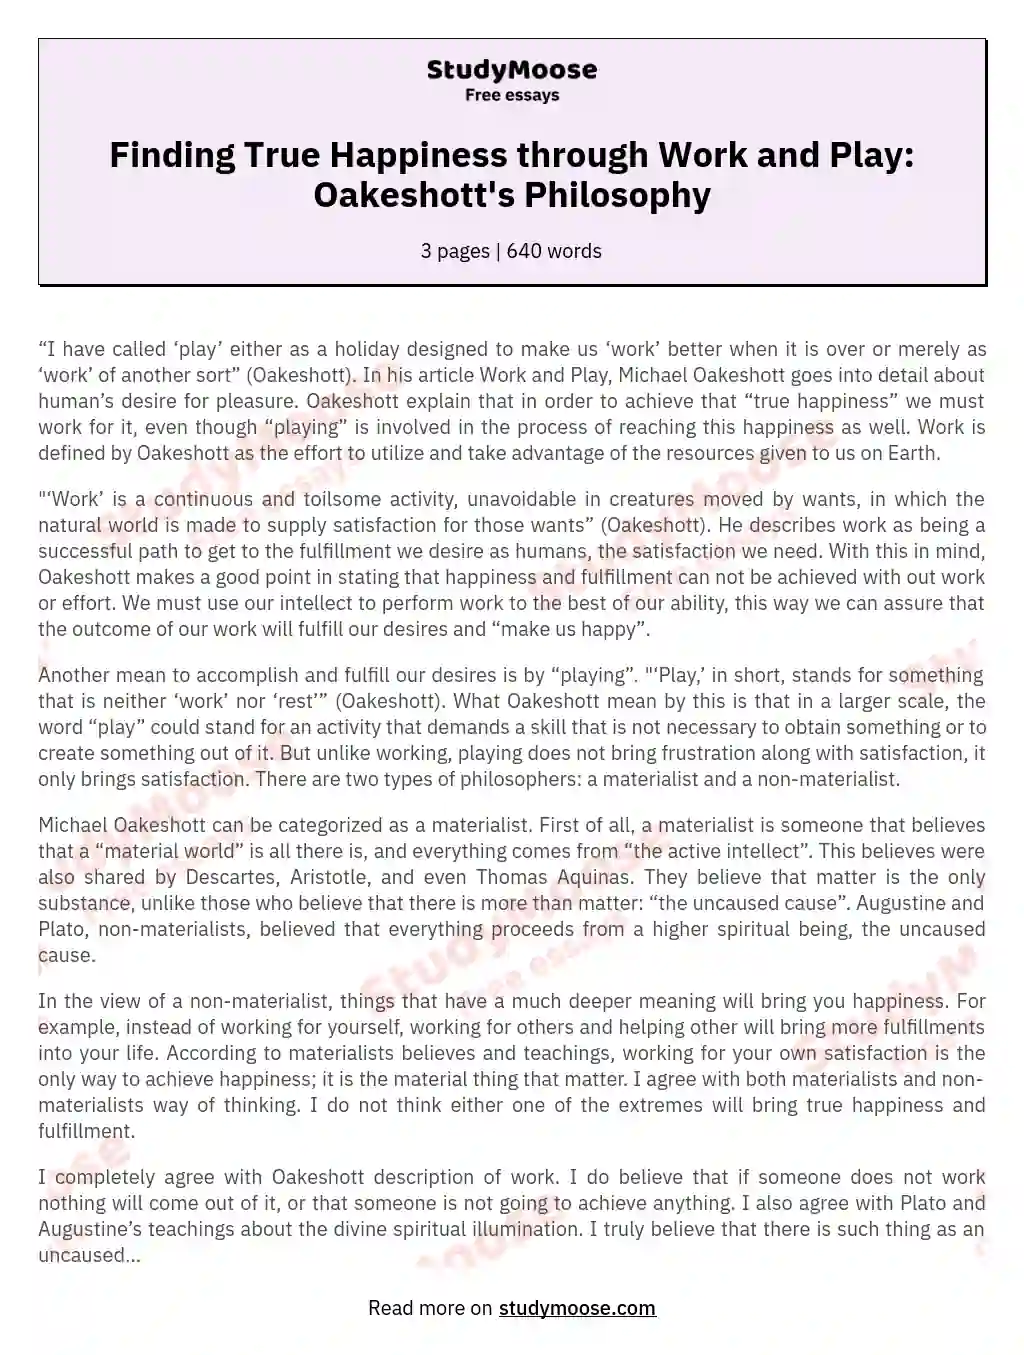 Finding True Happiness through Work and Play: Oakeshott's Philosophy essay